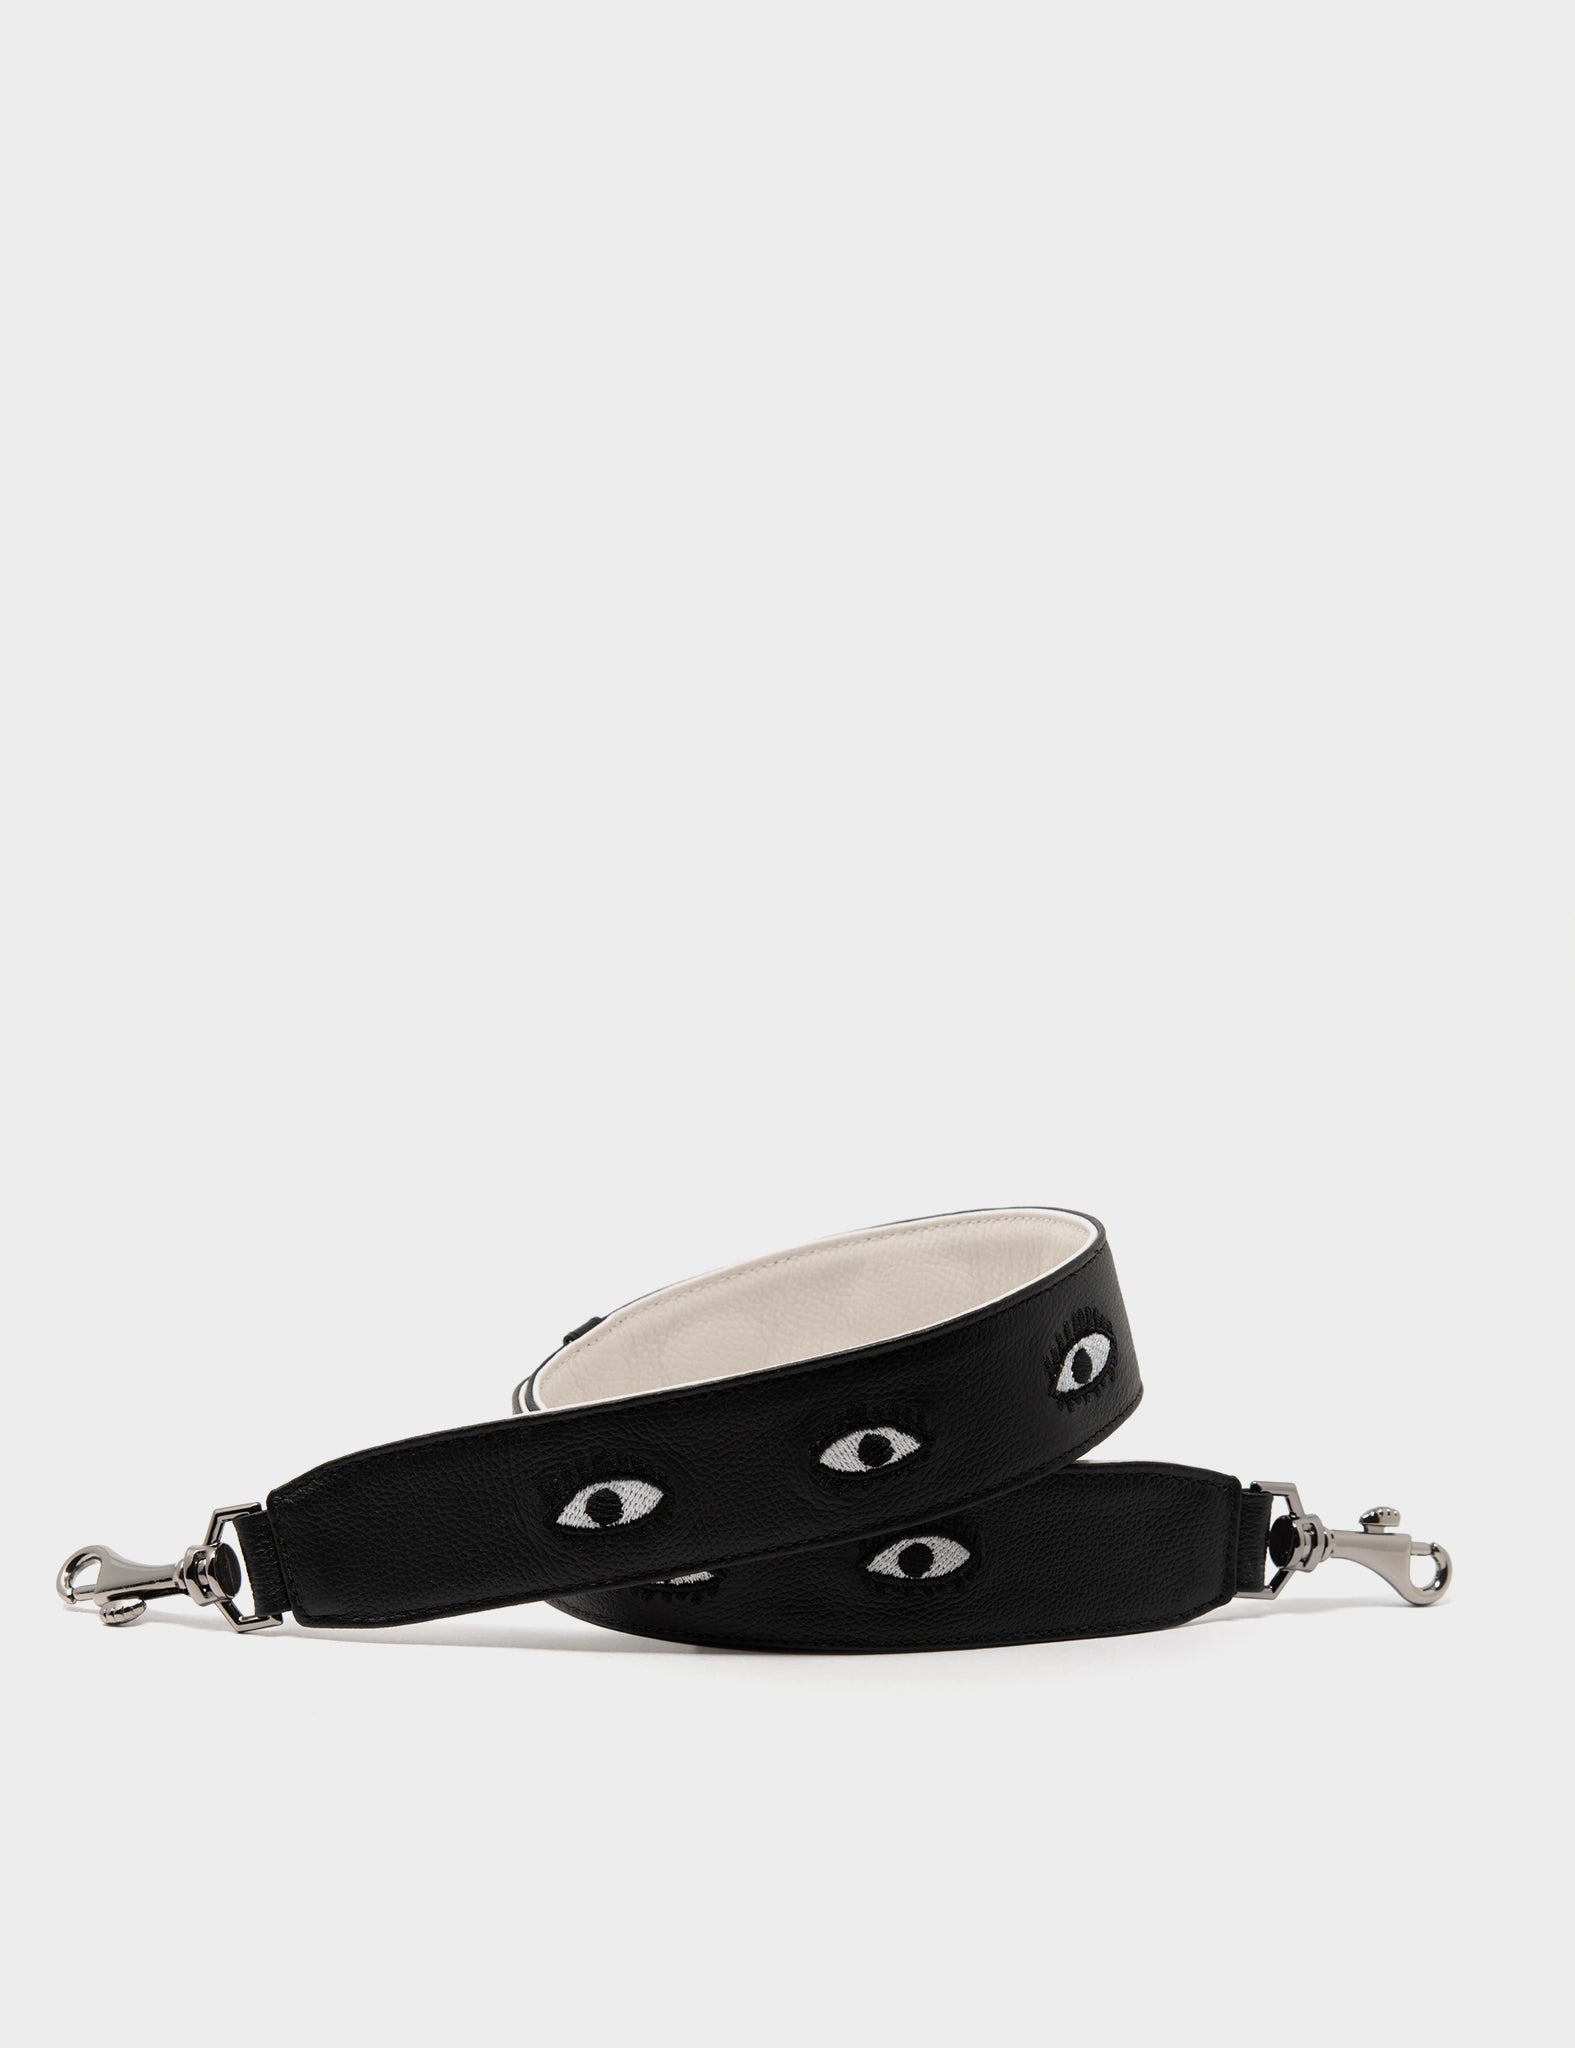 Detachable Black Leather Shoulder Strap - All Over Eyes Embroidery